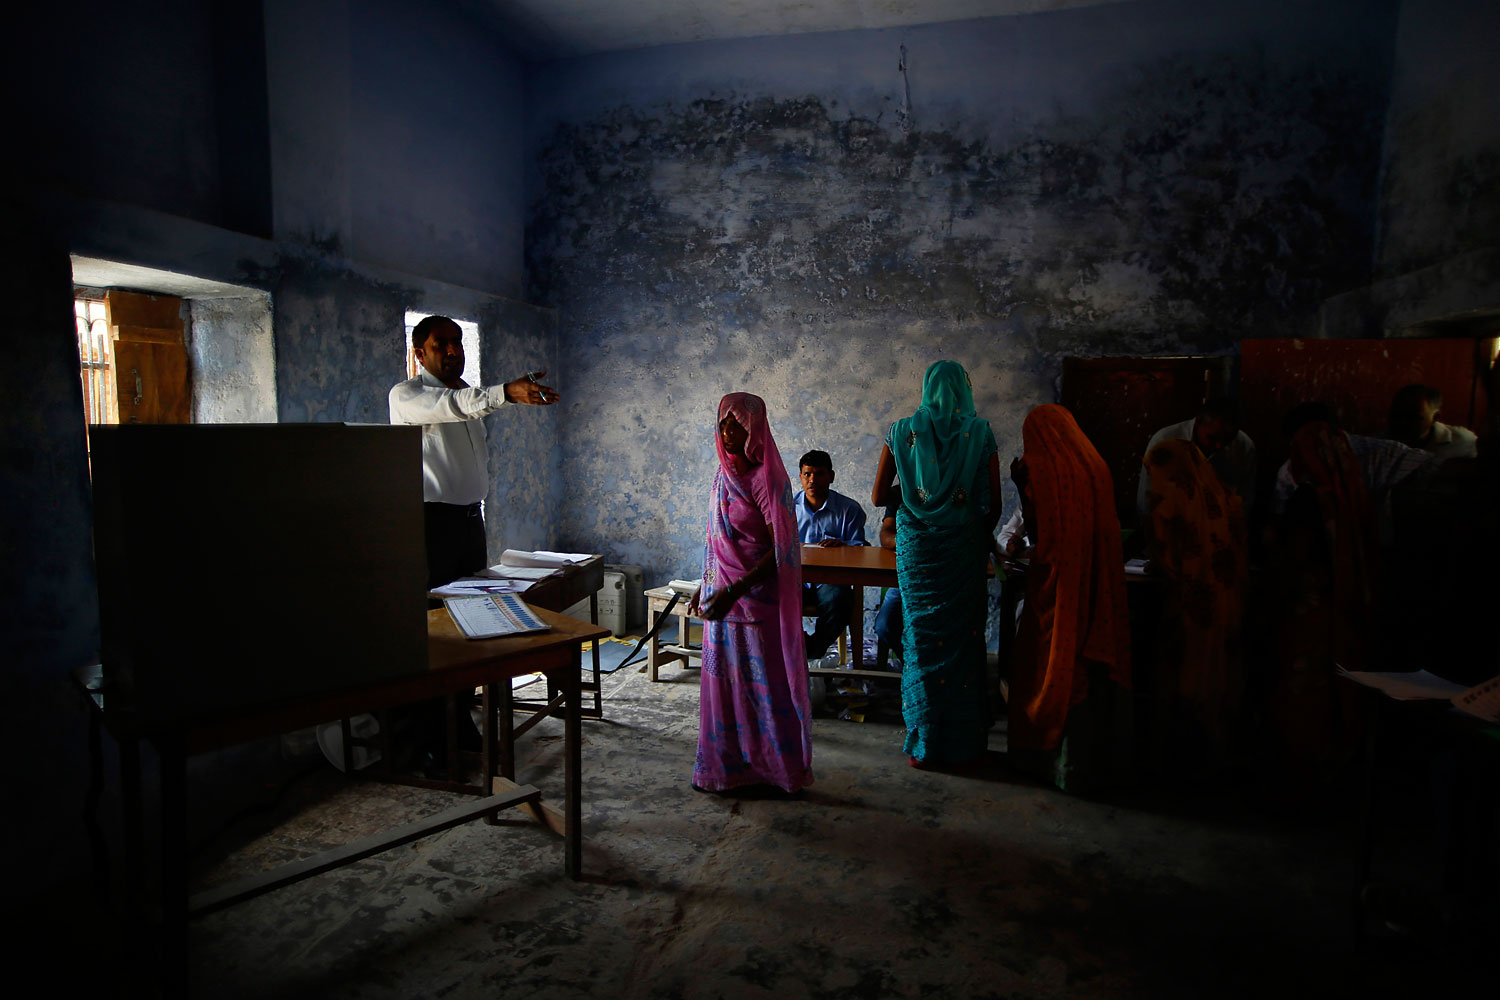 A woman voter is guided by an officer at a polling booth in Ujina, Haryana, India on April 10, 2014 for the crucial third phase of national elections.